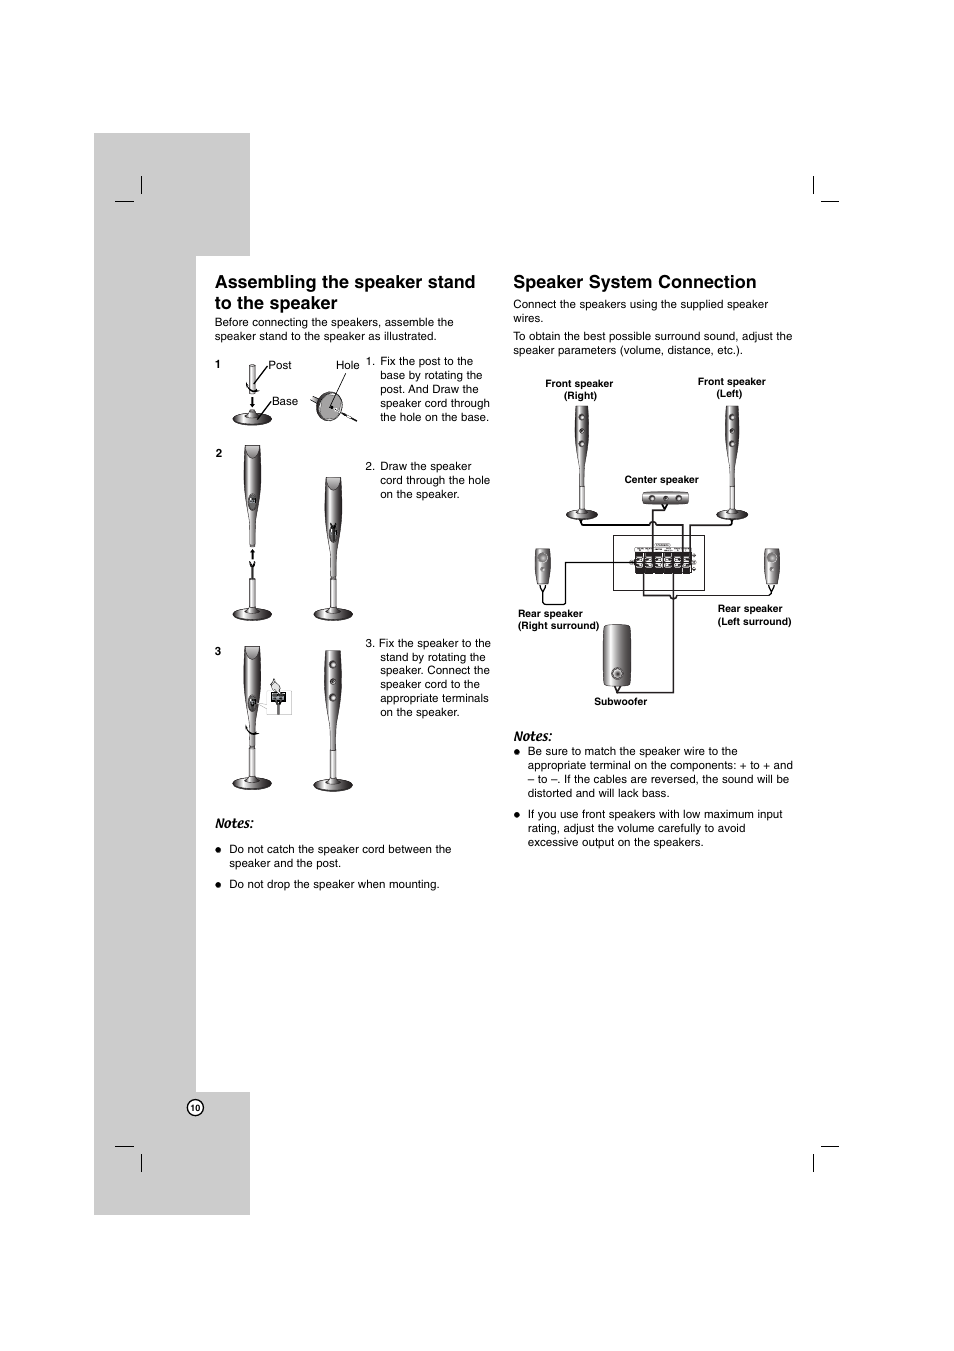 Assembling the speaker stand to the speaker, Speaker system connection | LG SH72PZ-F User Manual | Page 10 / 28